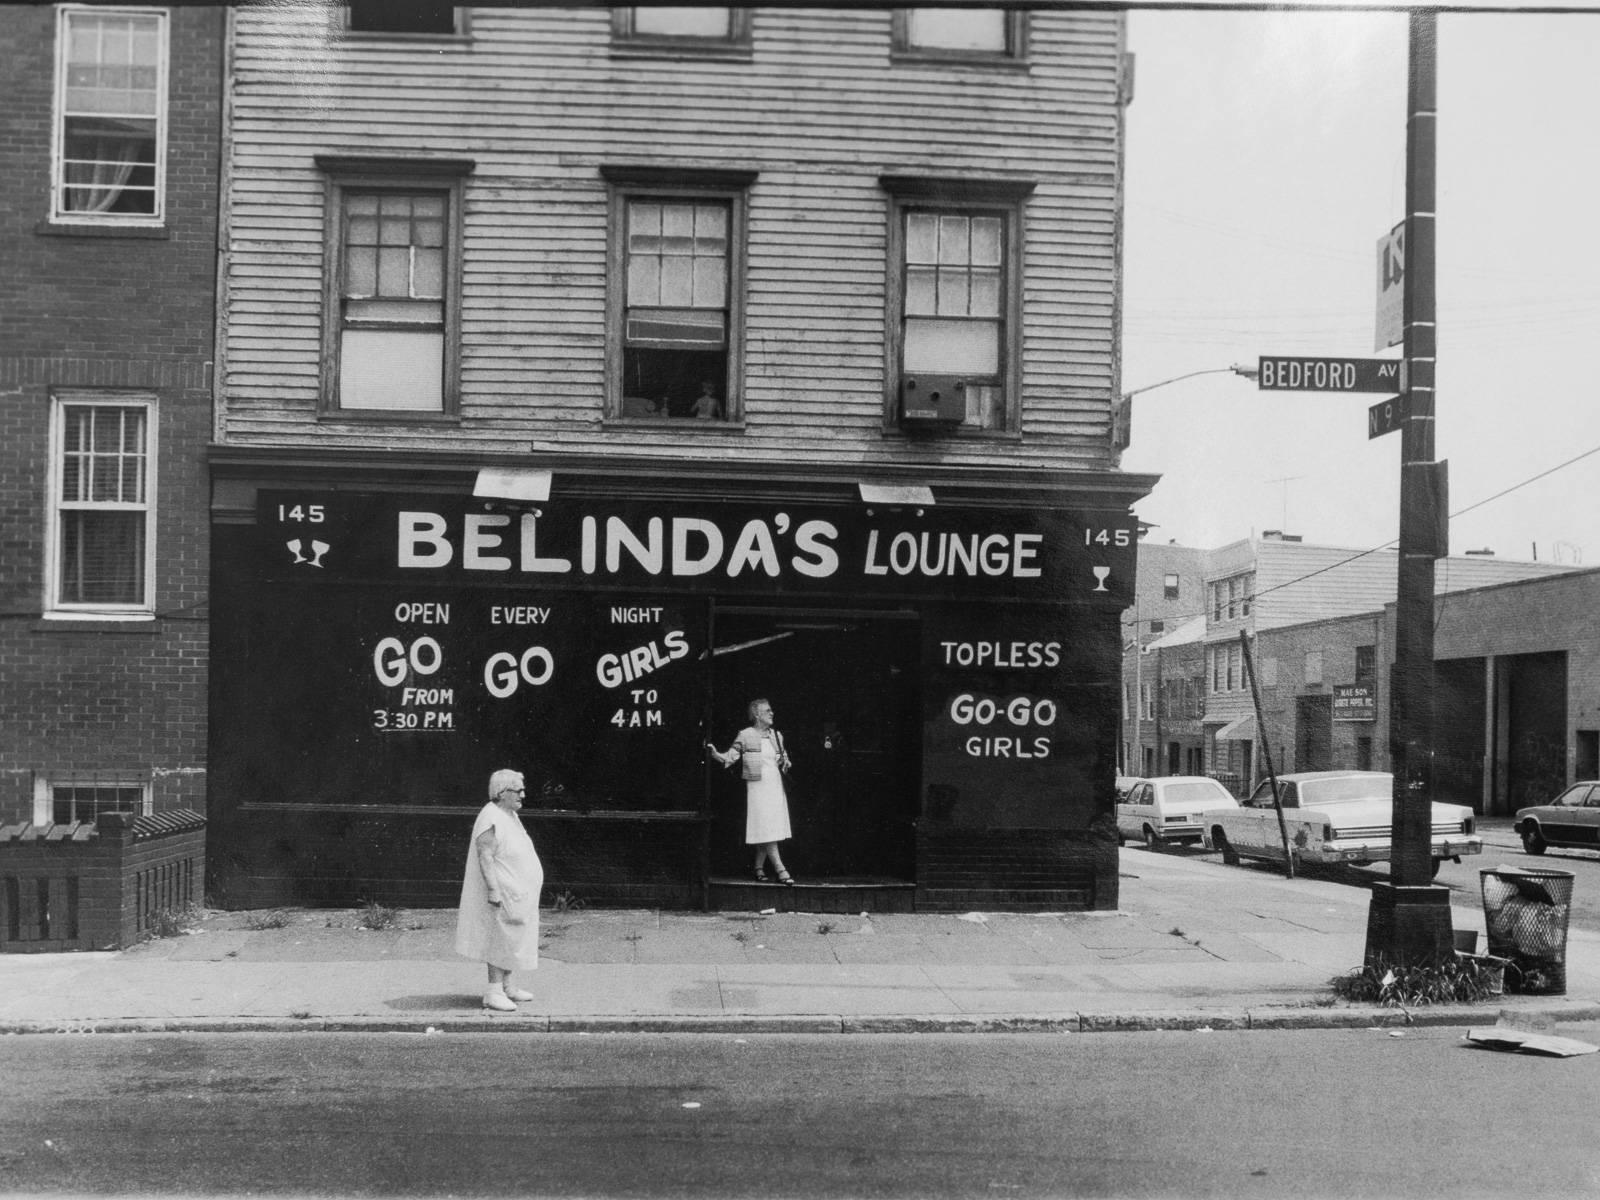 Belinda's lounge by Anders Goldfarb. Goldfarb is a New York photographer who documented the Williamsburg neighborhood of Brooklyn in the 1980s. Hand-printed and signed by the photographer. It will ship in a black gallery frame that shows the raw